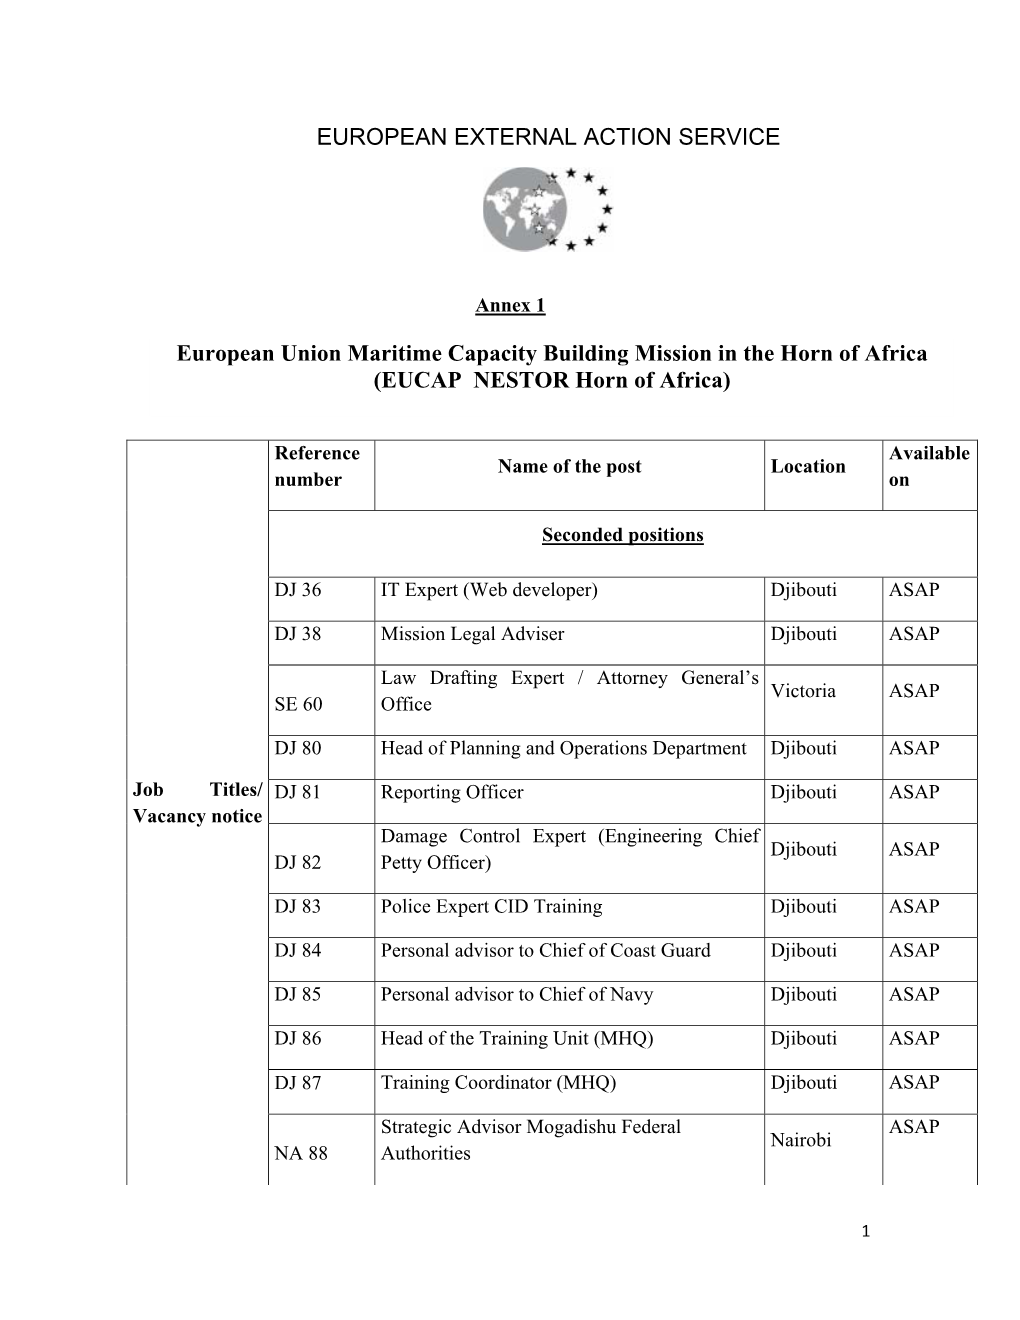 EUROPEAN EXTERNAL ACTION SERVICE European Union Maritime Capacity Building Mission in the Horn of Africa (EUCAP NESTOR Horn Of